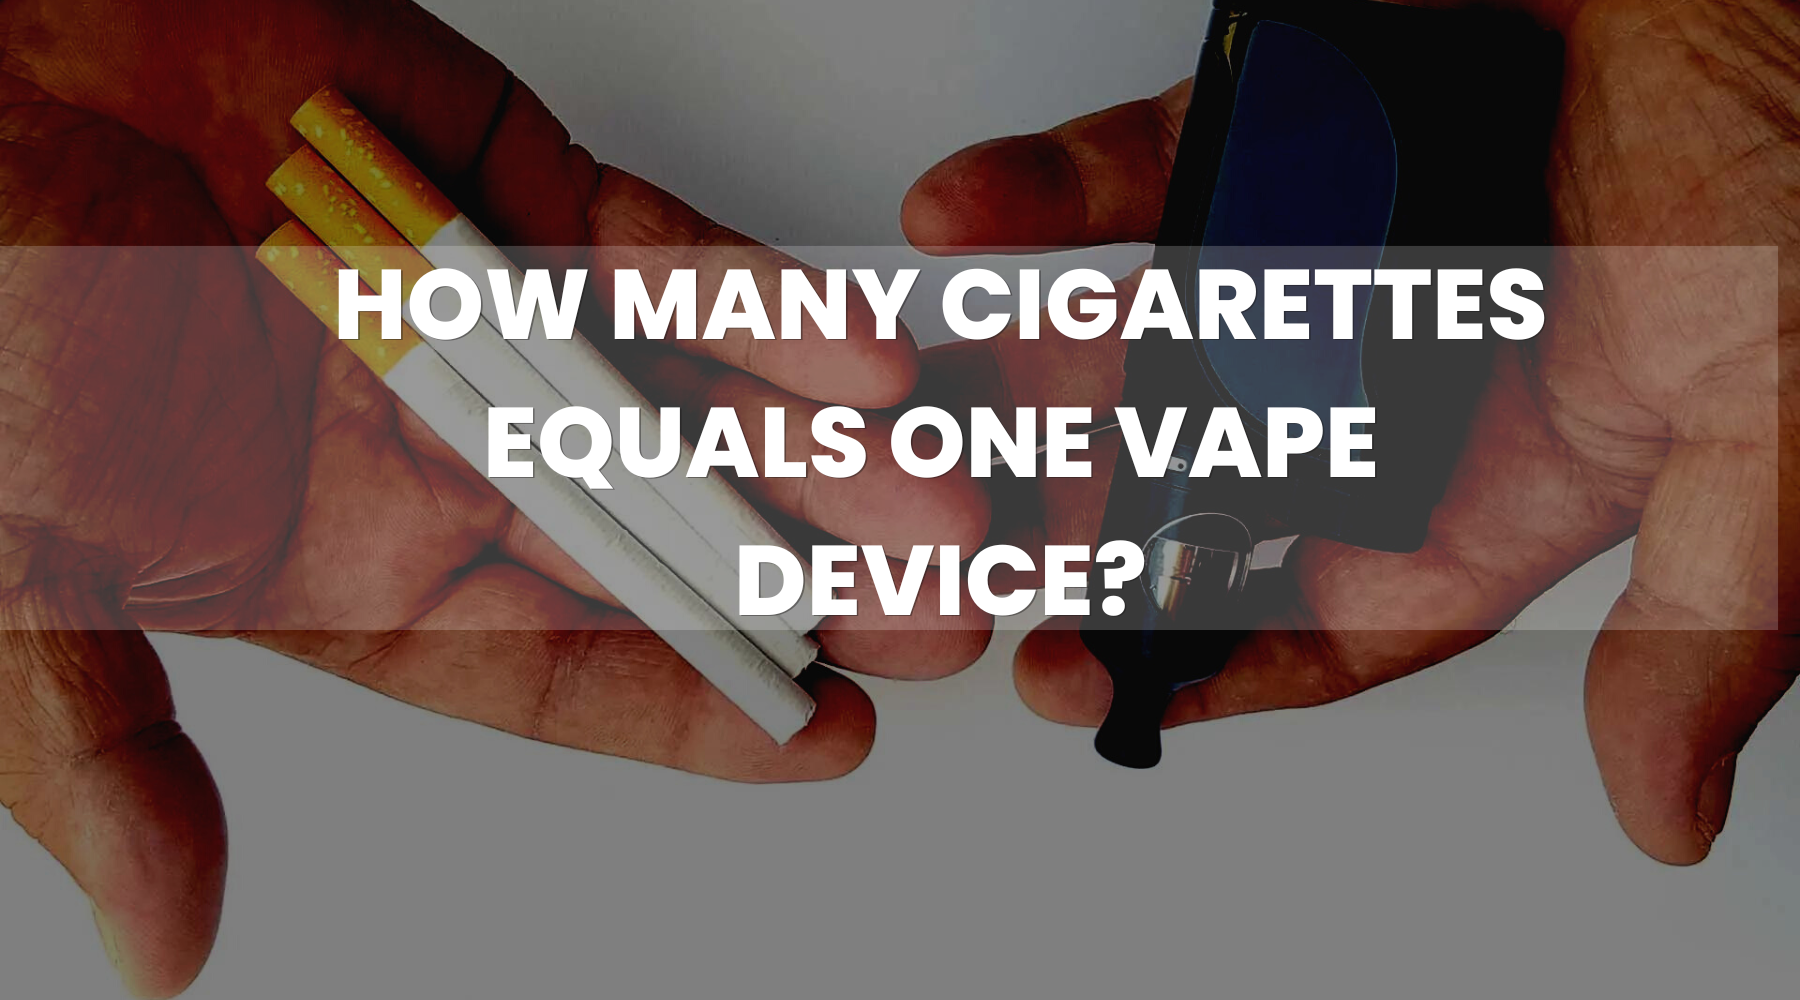 How Many Cigarettes Equals One Vape Device?